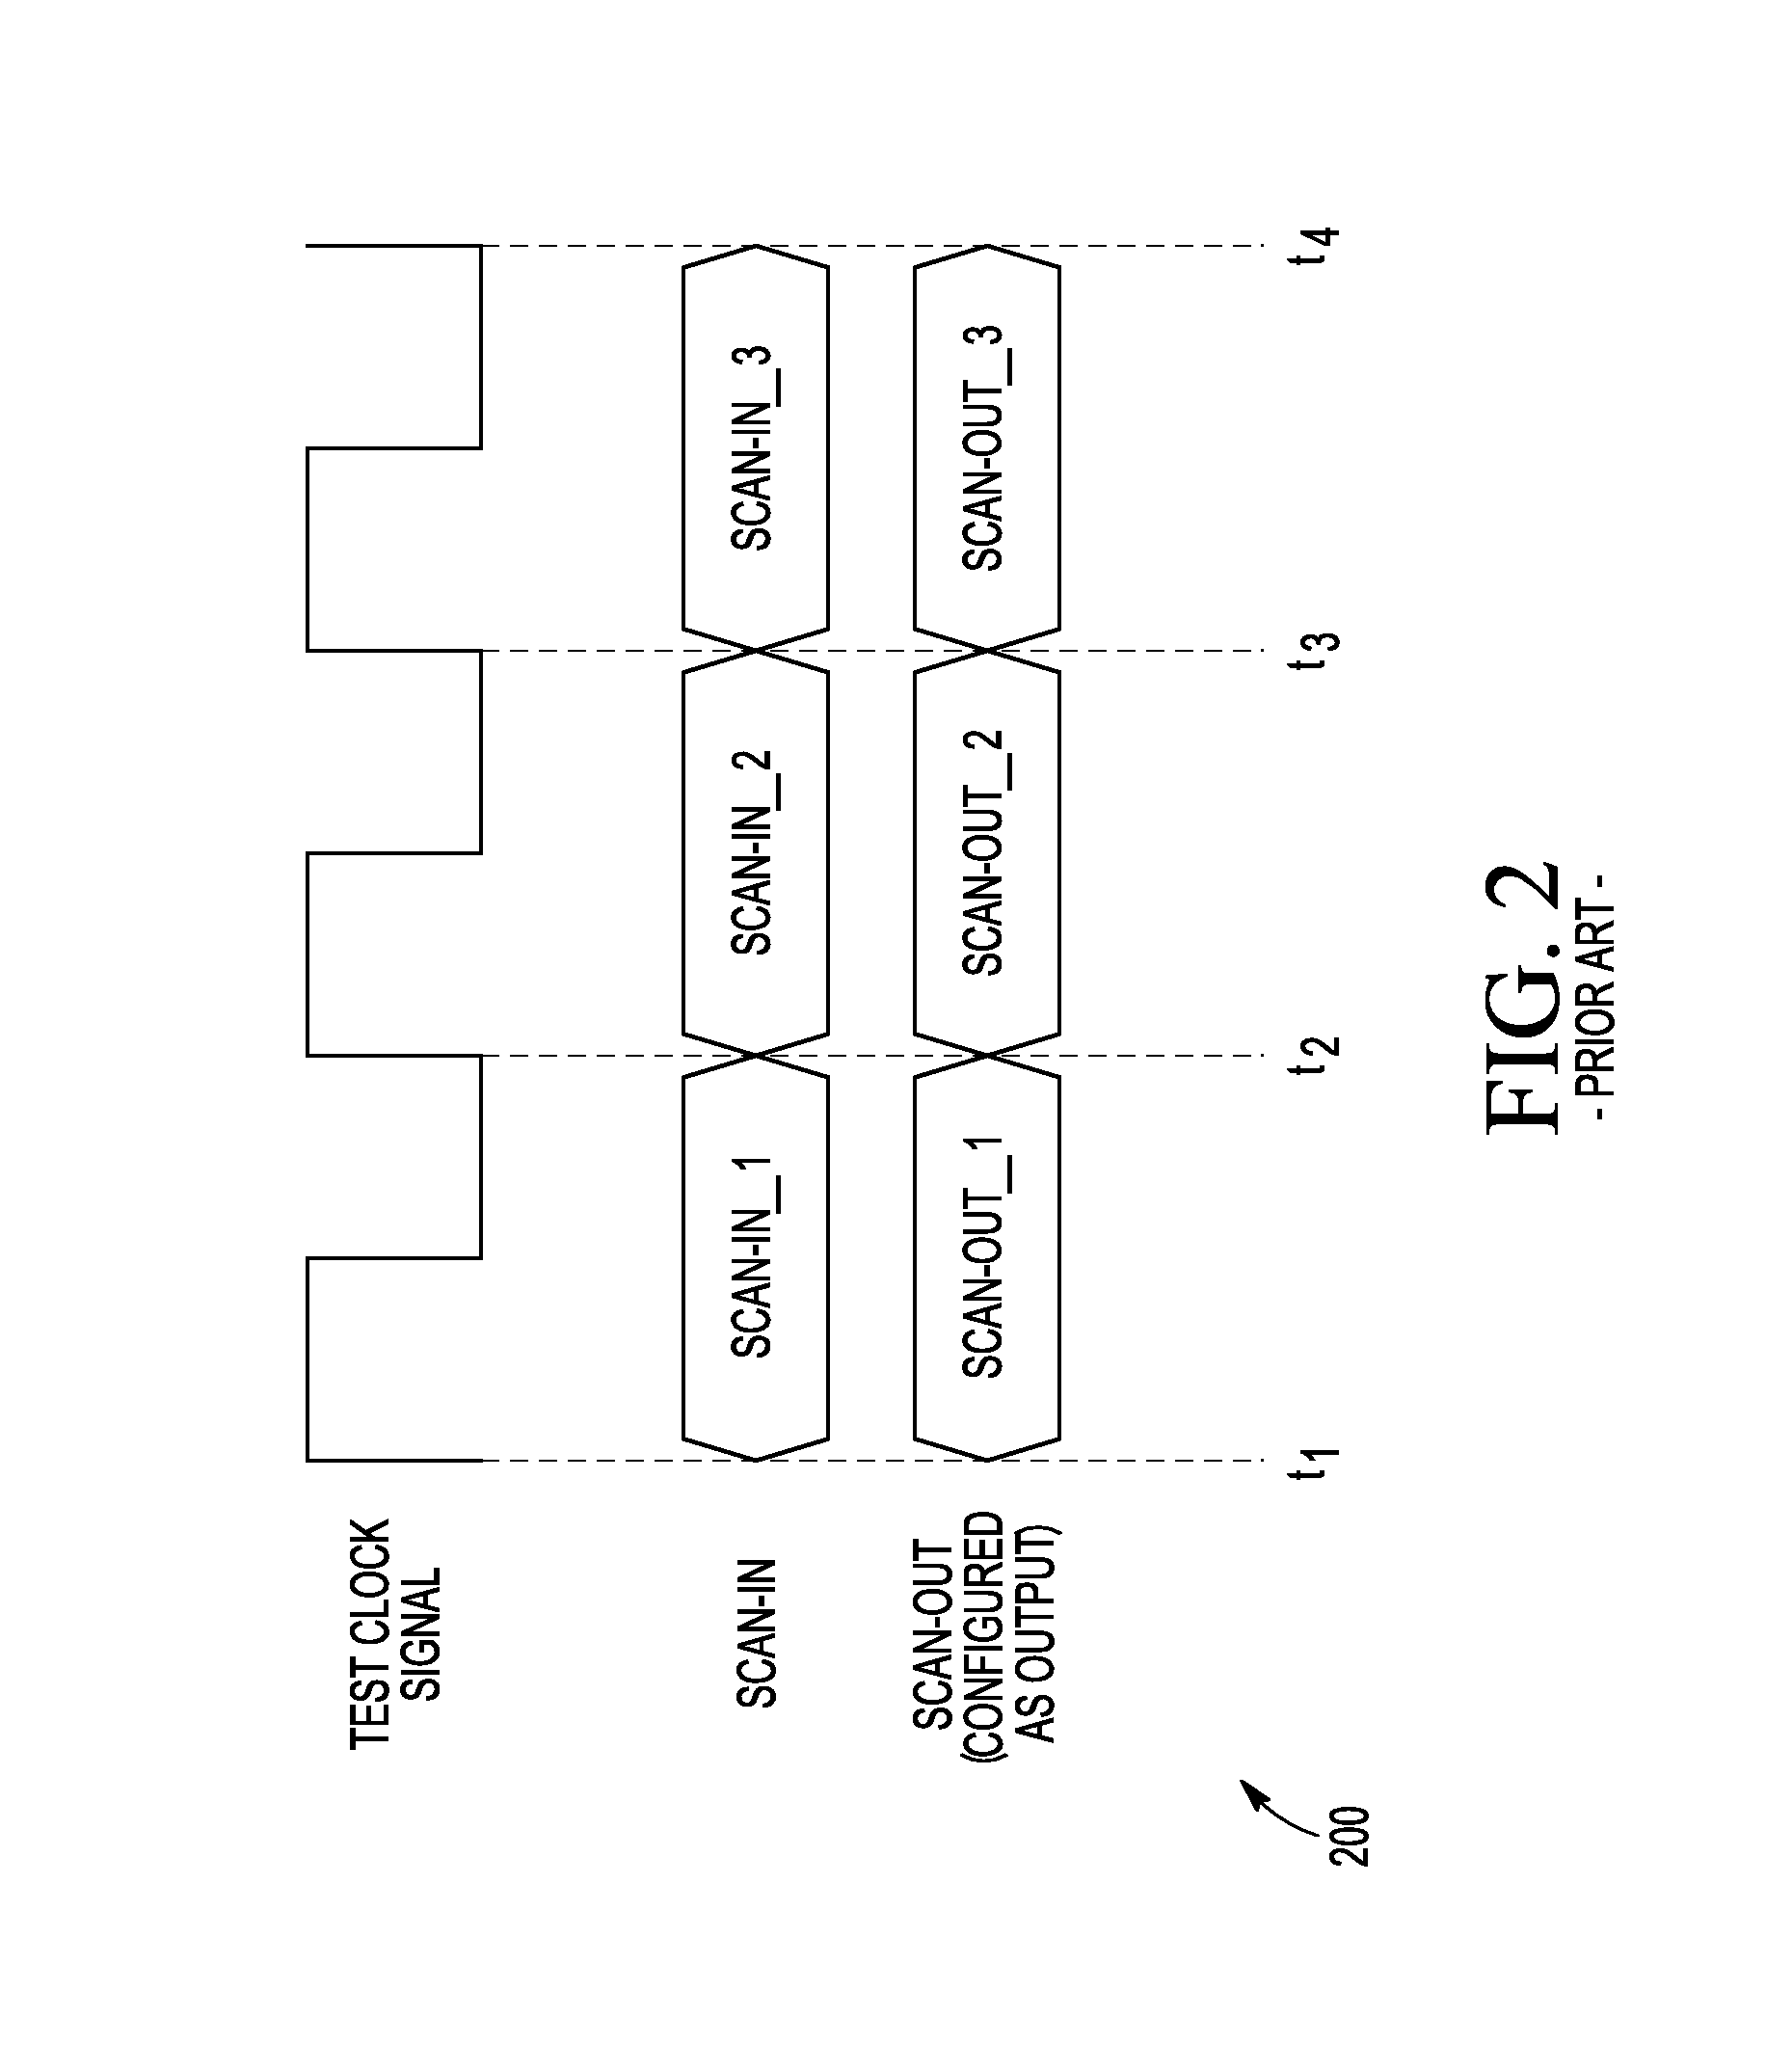 System and method for scan testing integrated circuits